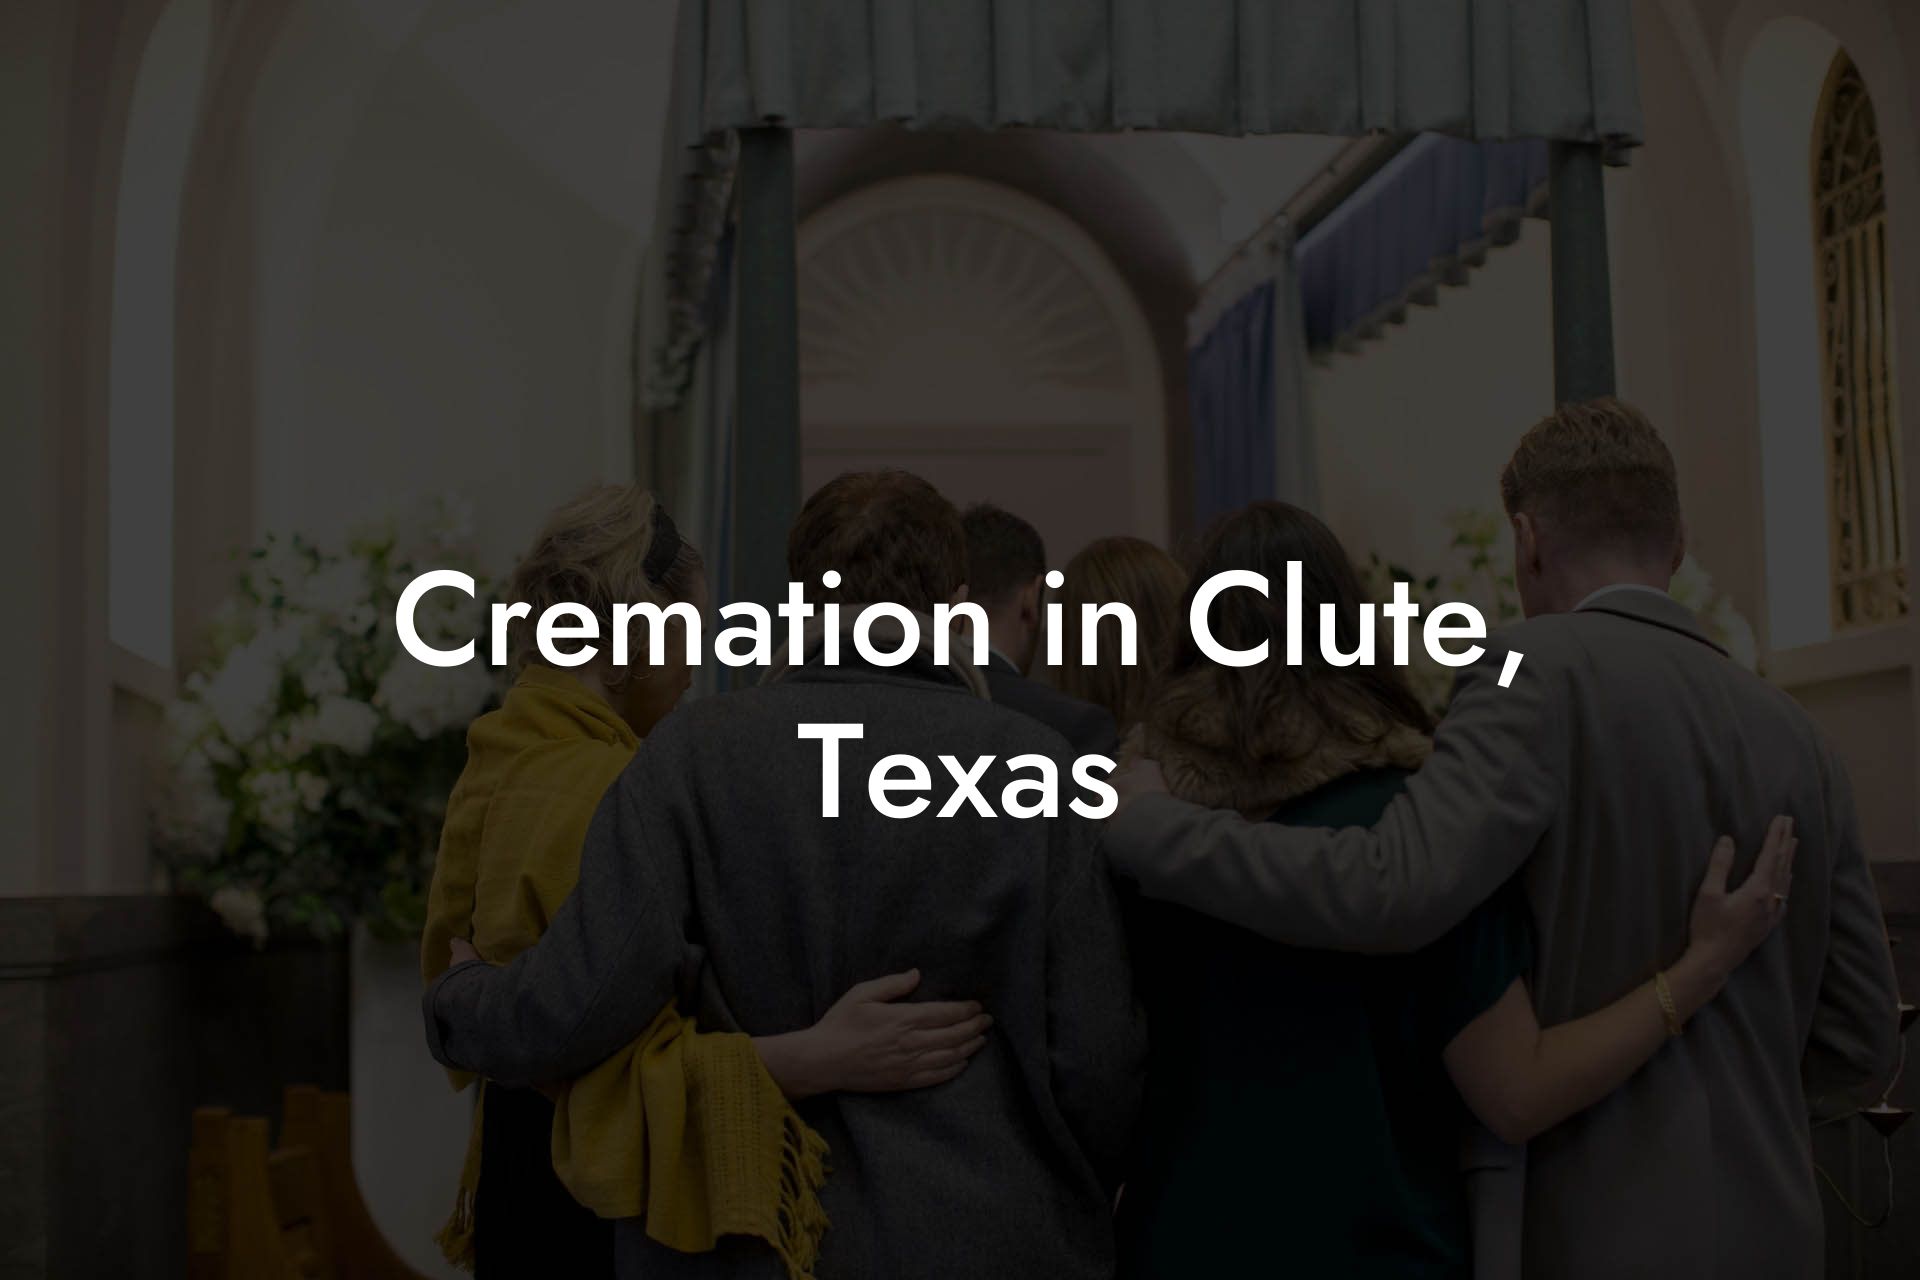 Cremation in Clute, Texas